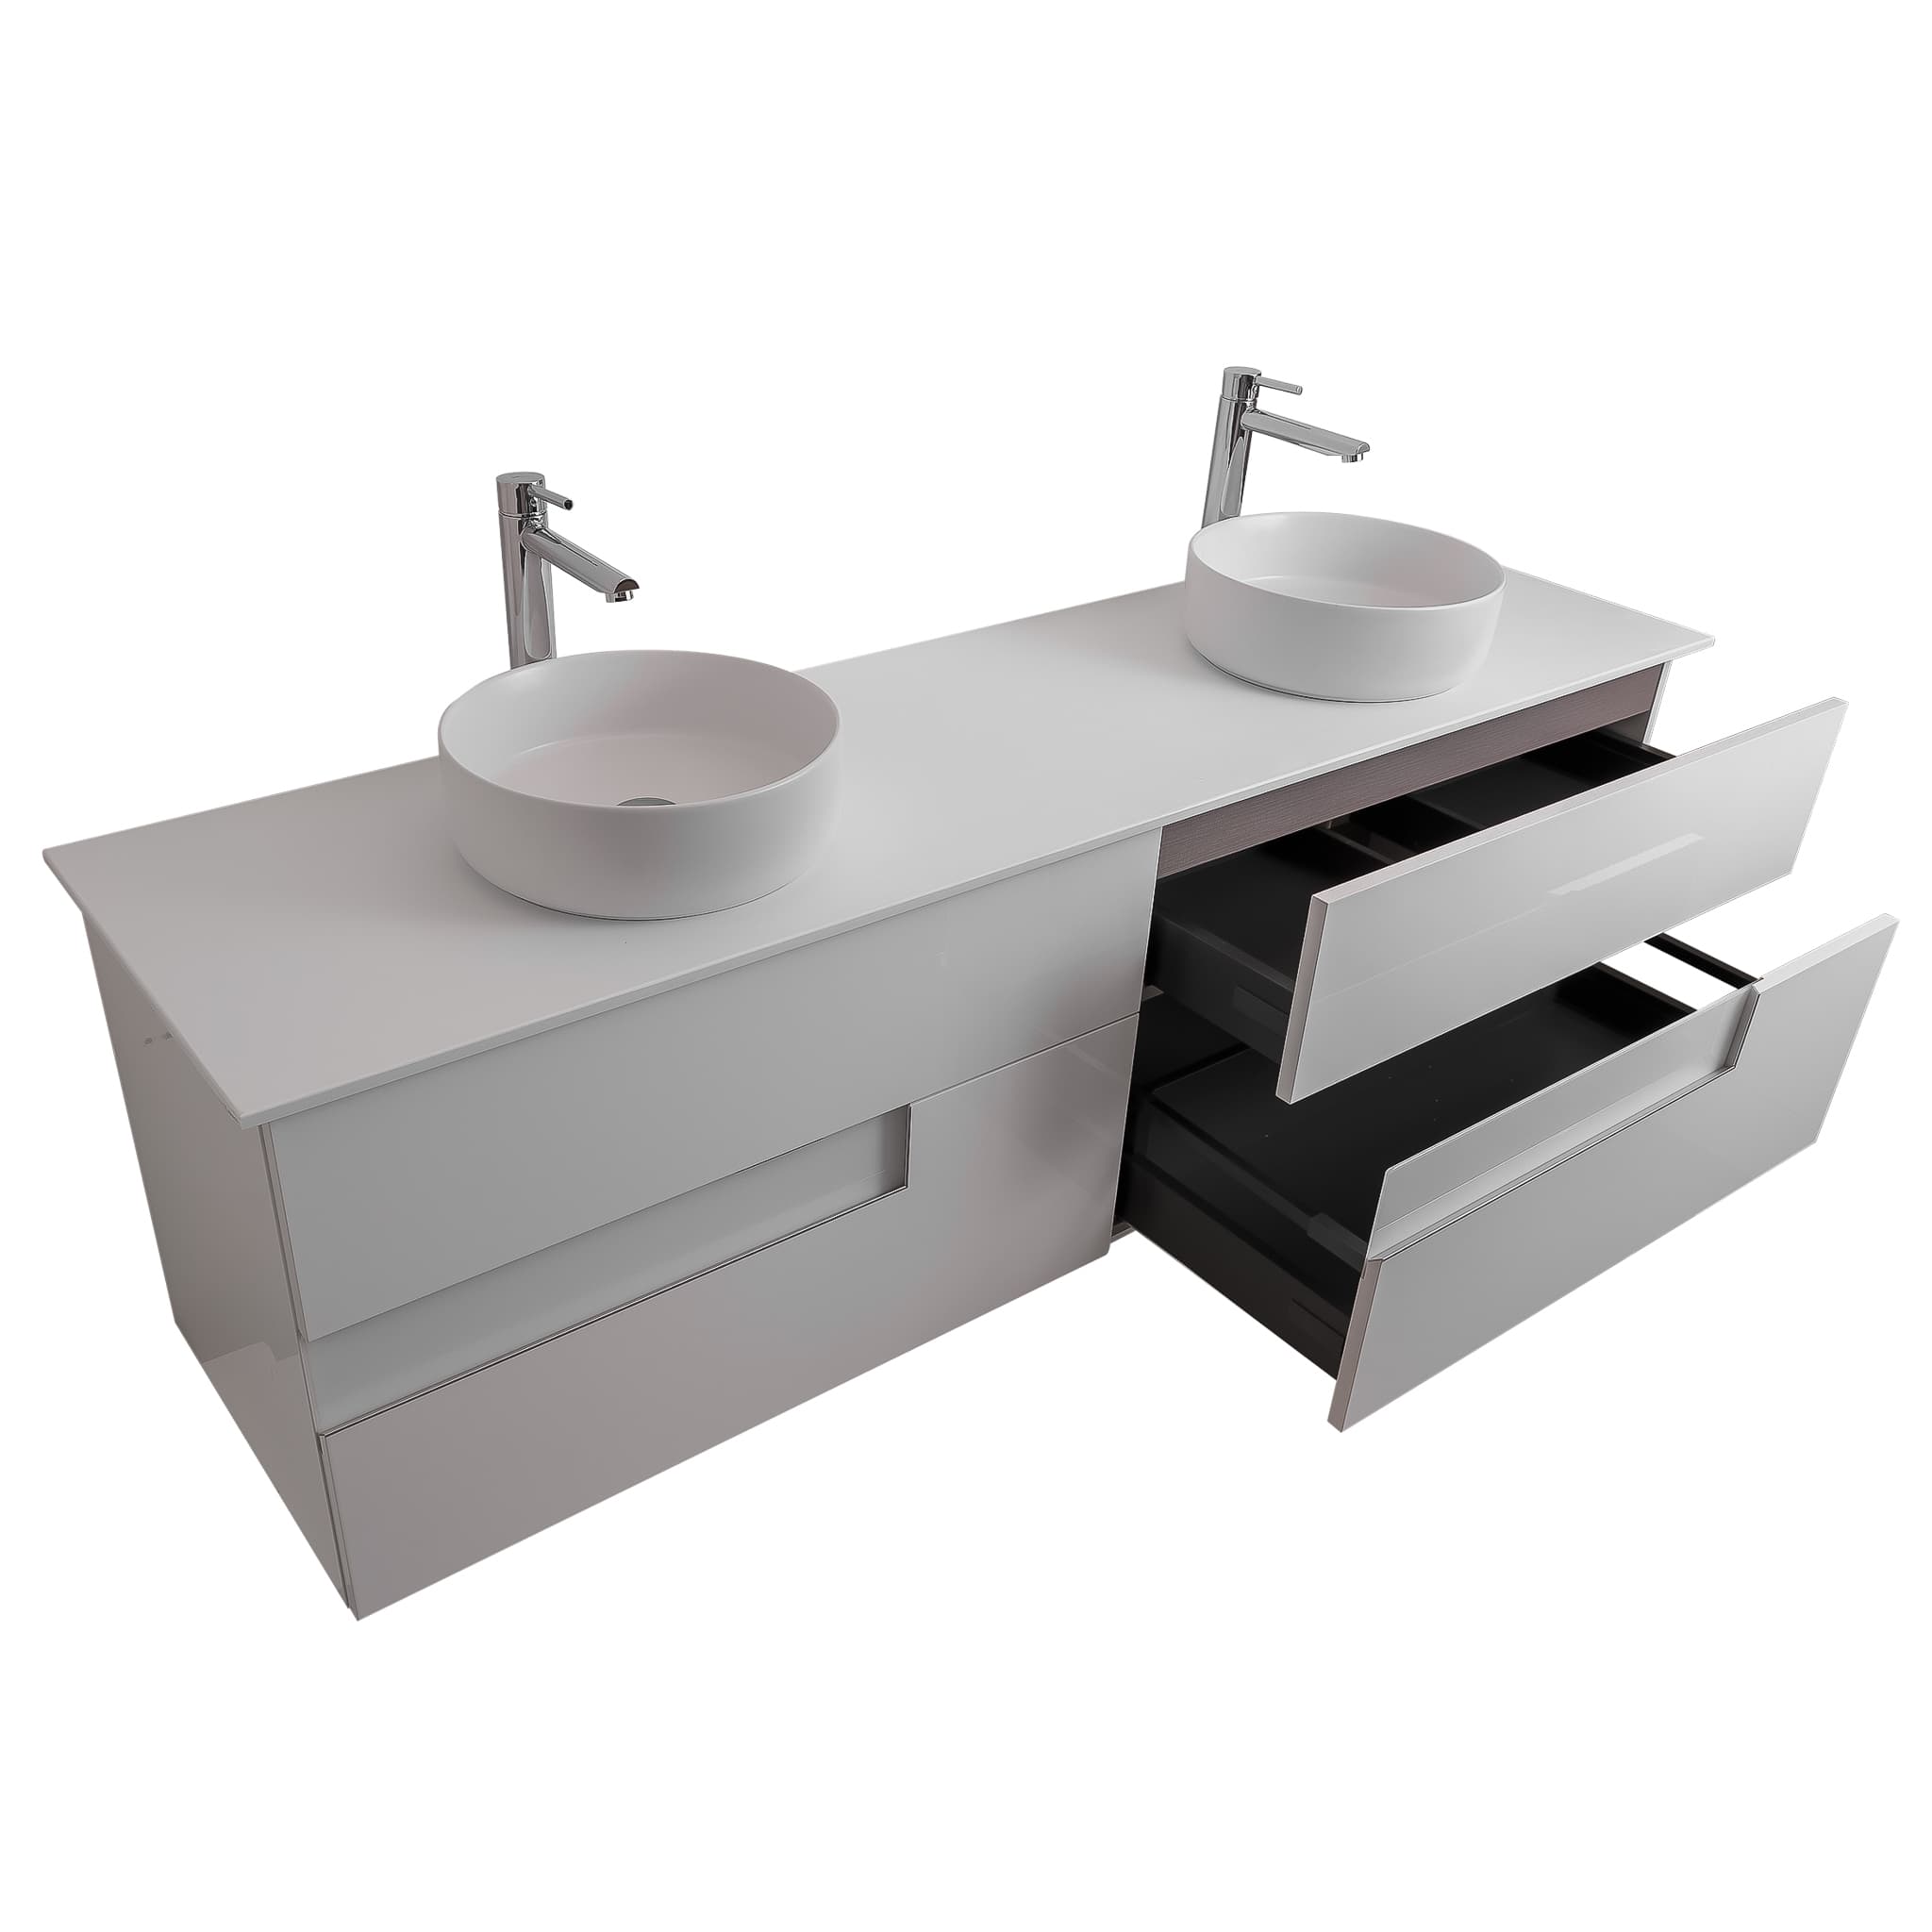 Vision 72 White High Gloss Cabinet, Ares White Top And Two Ares White Ceramic Basin, Wall Mounted Modern Vanity Set